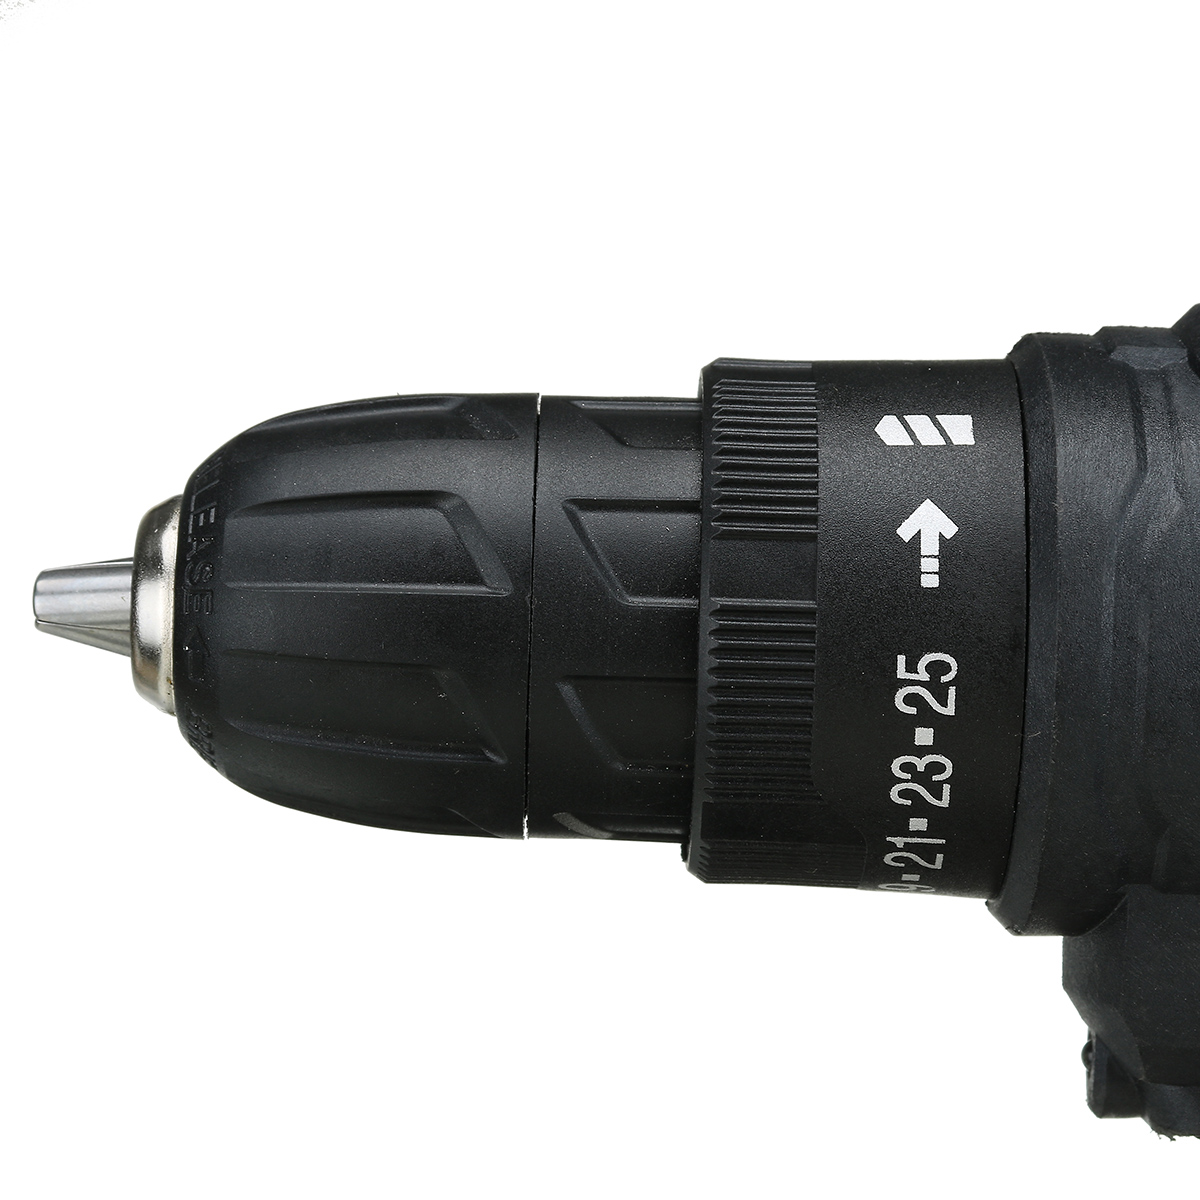 48V-1500W-Electric-Drill-28Nm-Max-Torque-LED-Light-Screwdriver-Power-W-12pc-Battery-1768846-6